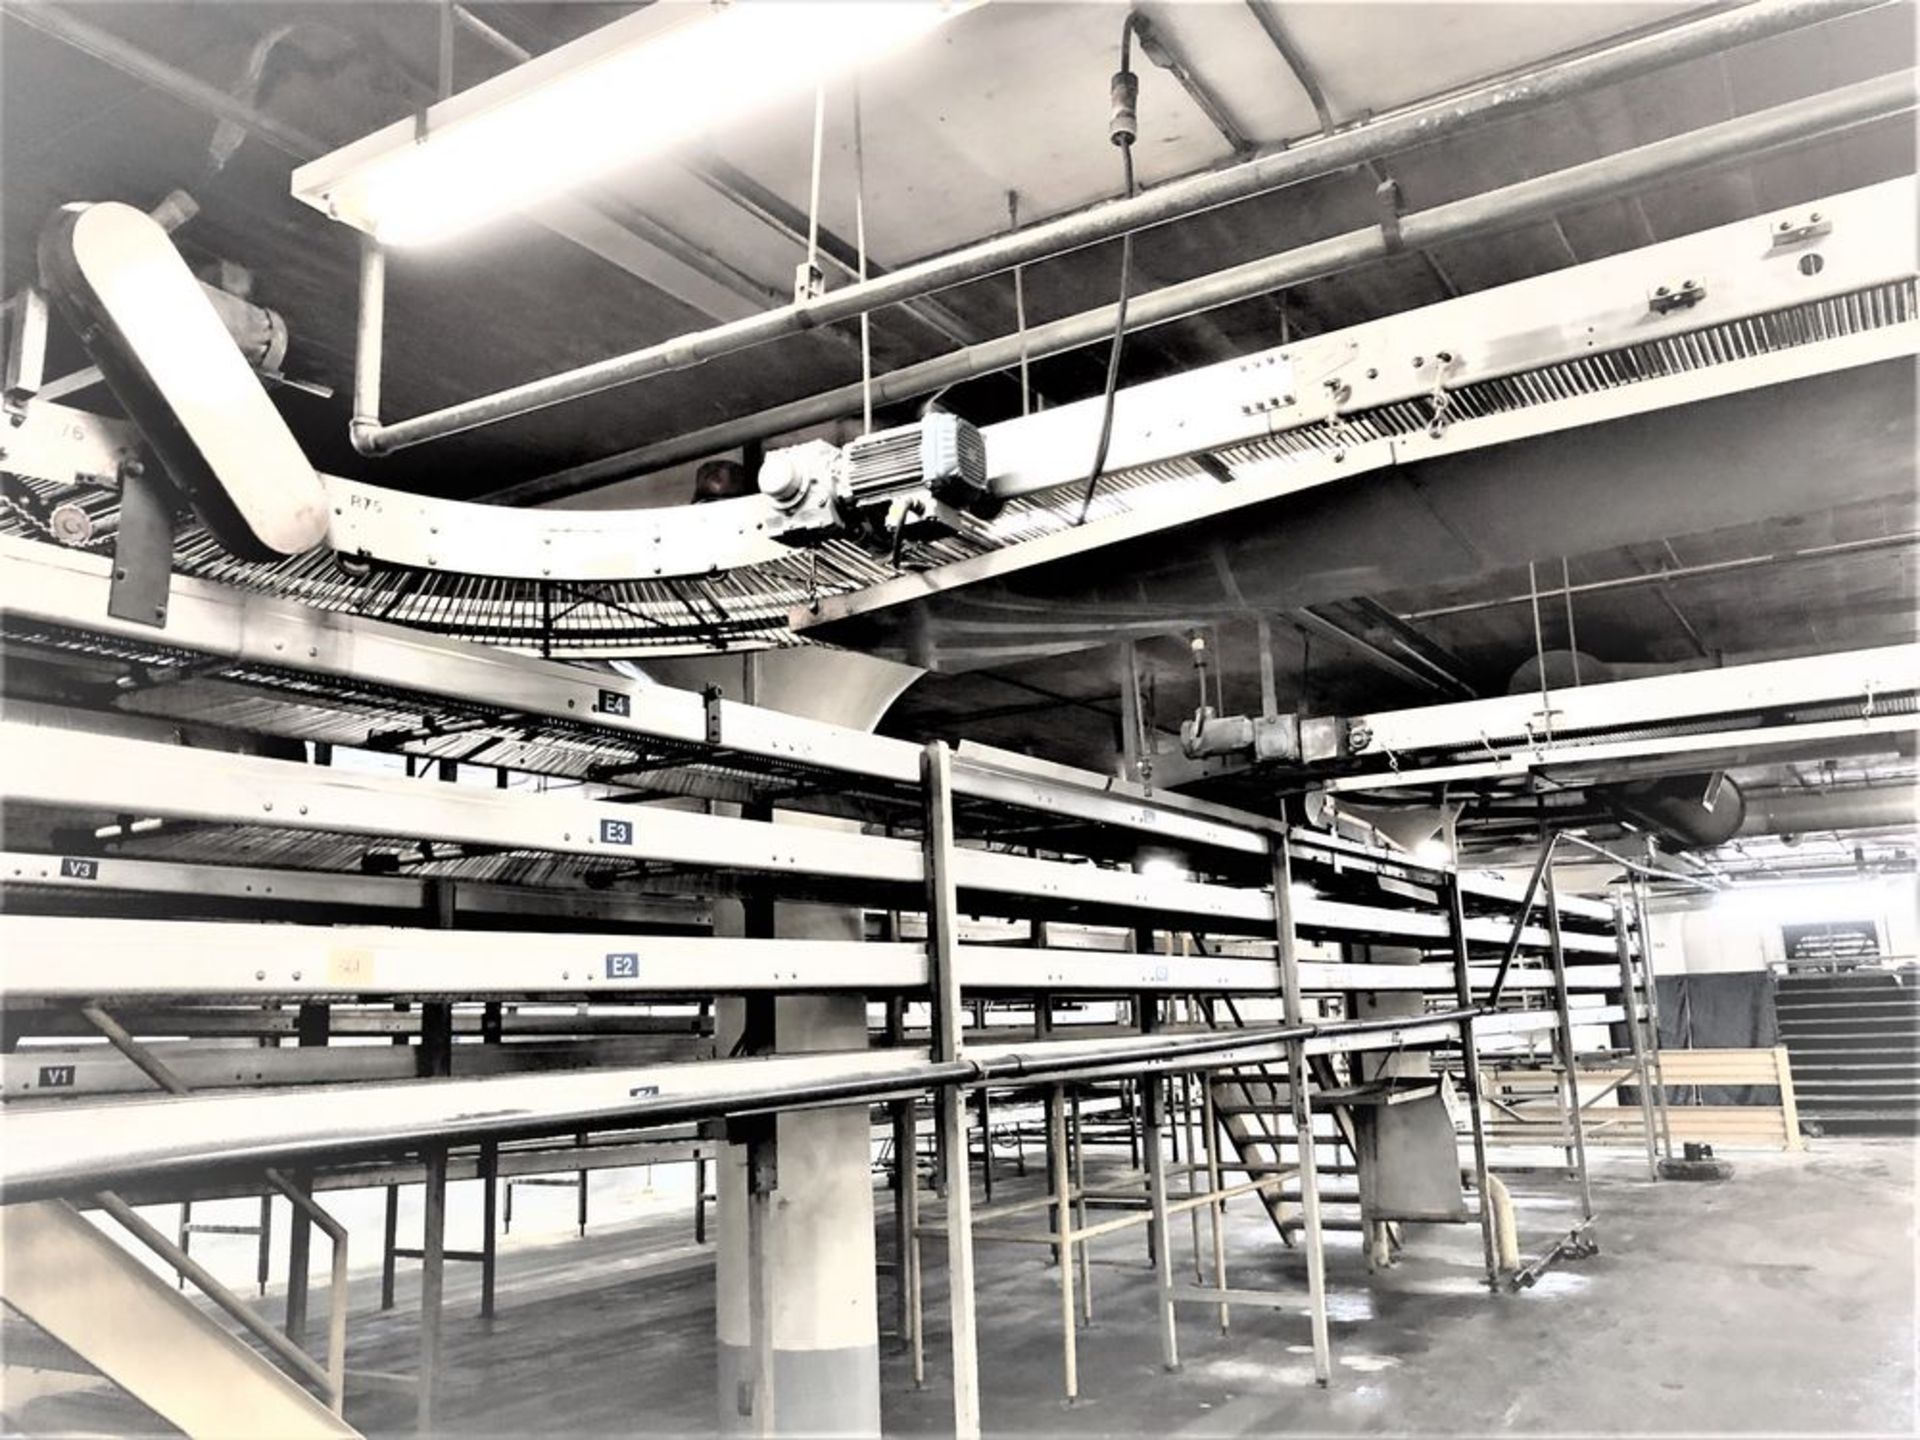 Bread Spiral Cooling Conveyor - Image 2 of 5